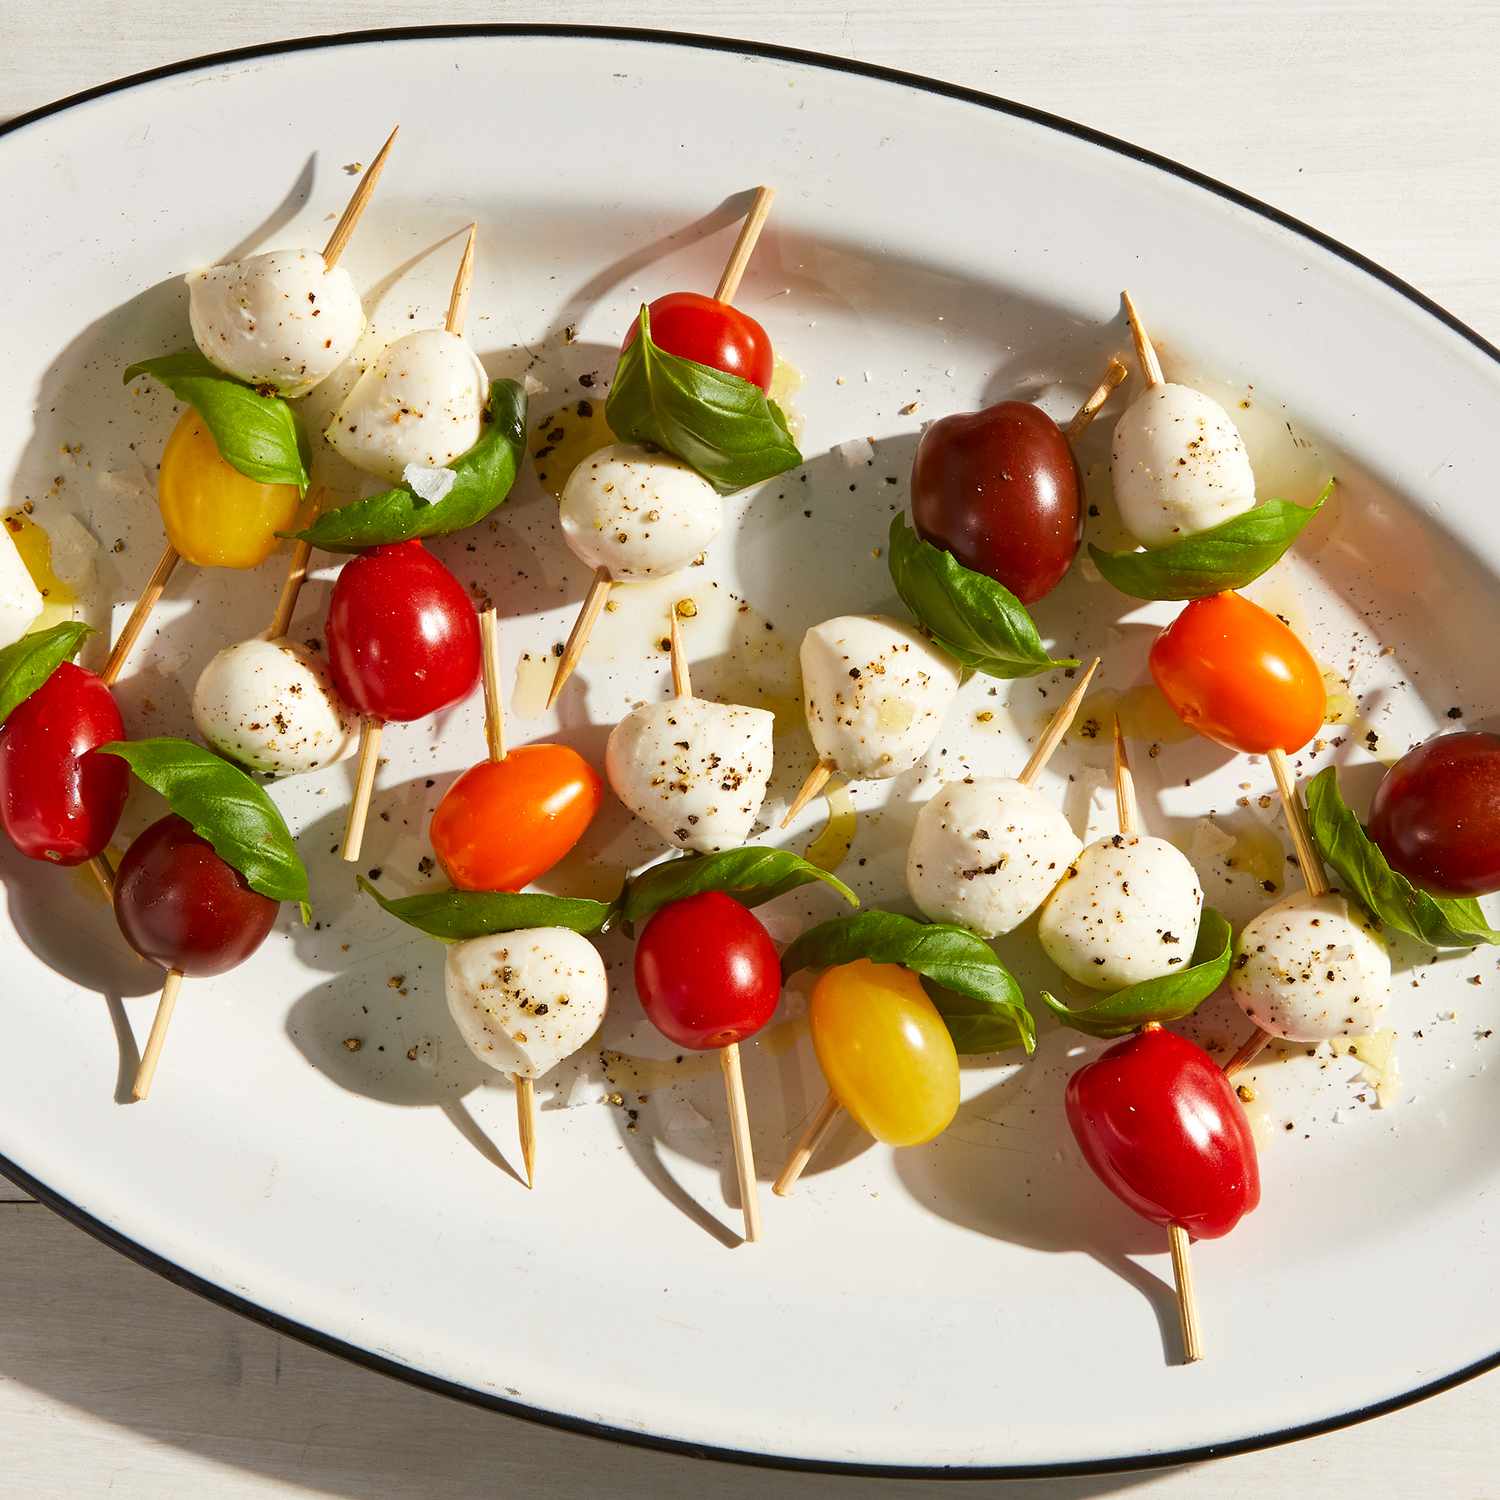 17 Summer Appetizers So Good, You'll Want to Eat Them for Dinner